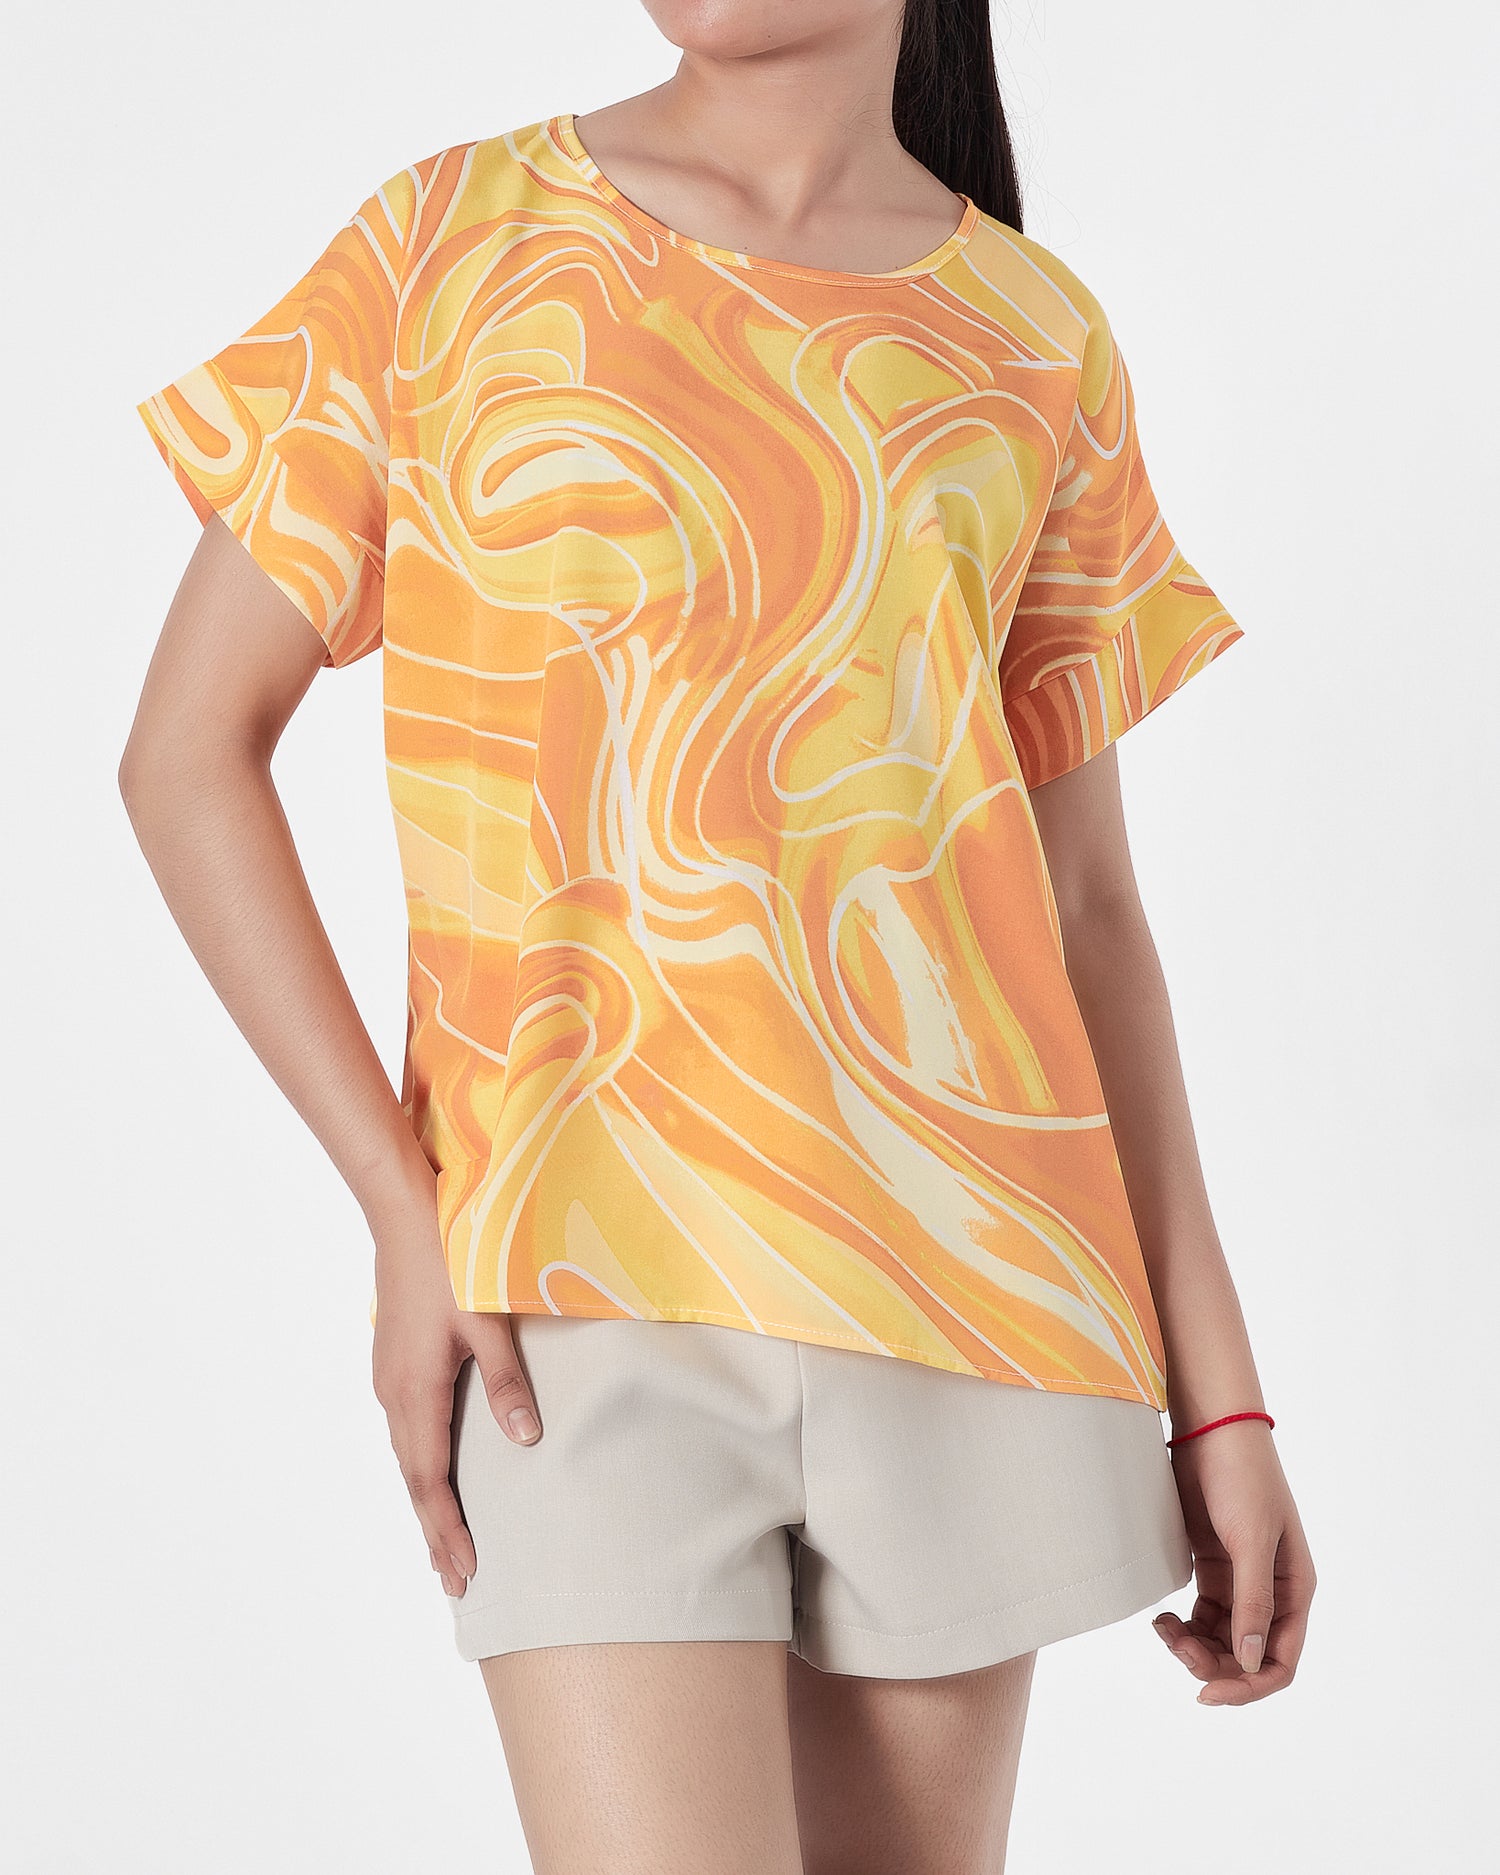 Gradient Color Lady  Shirts Short Sleeve 12.90